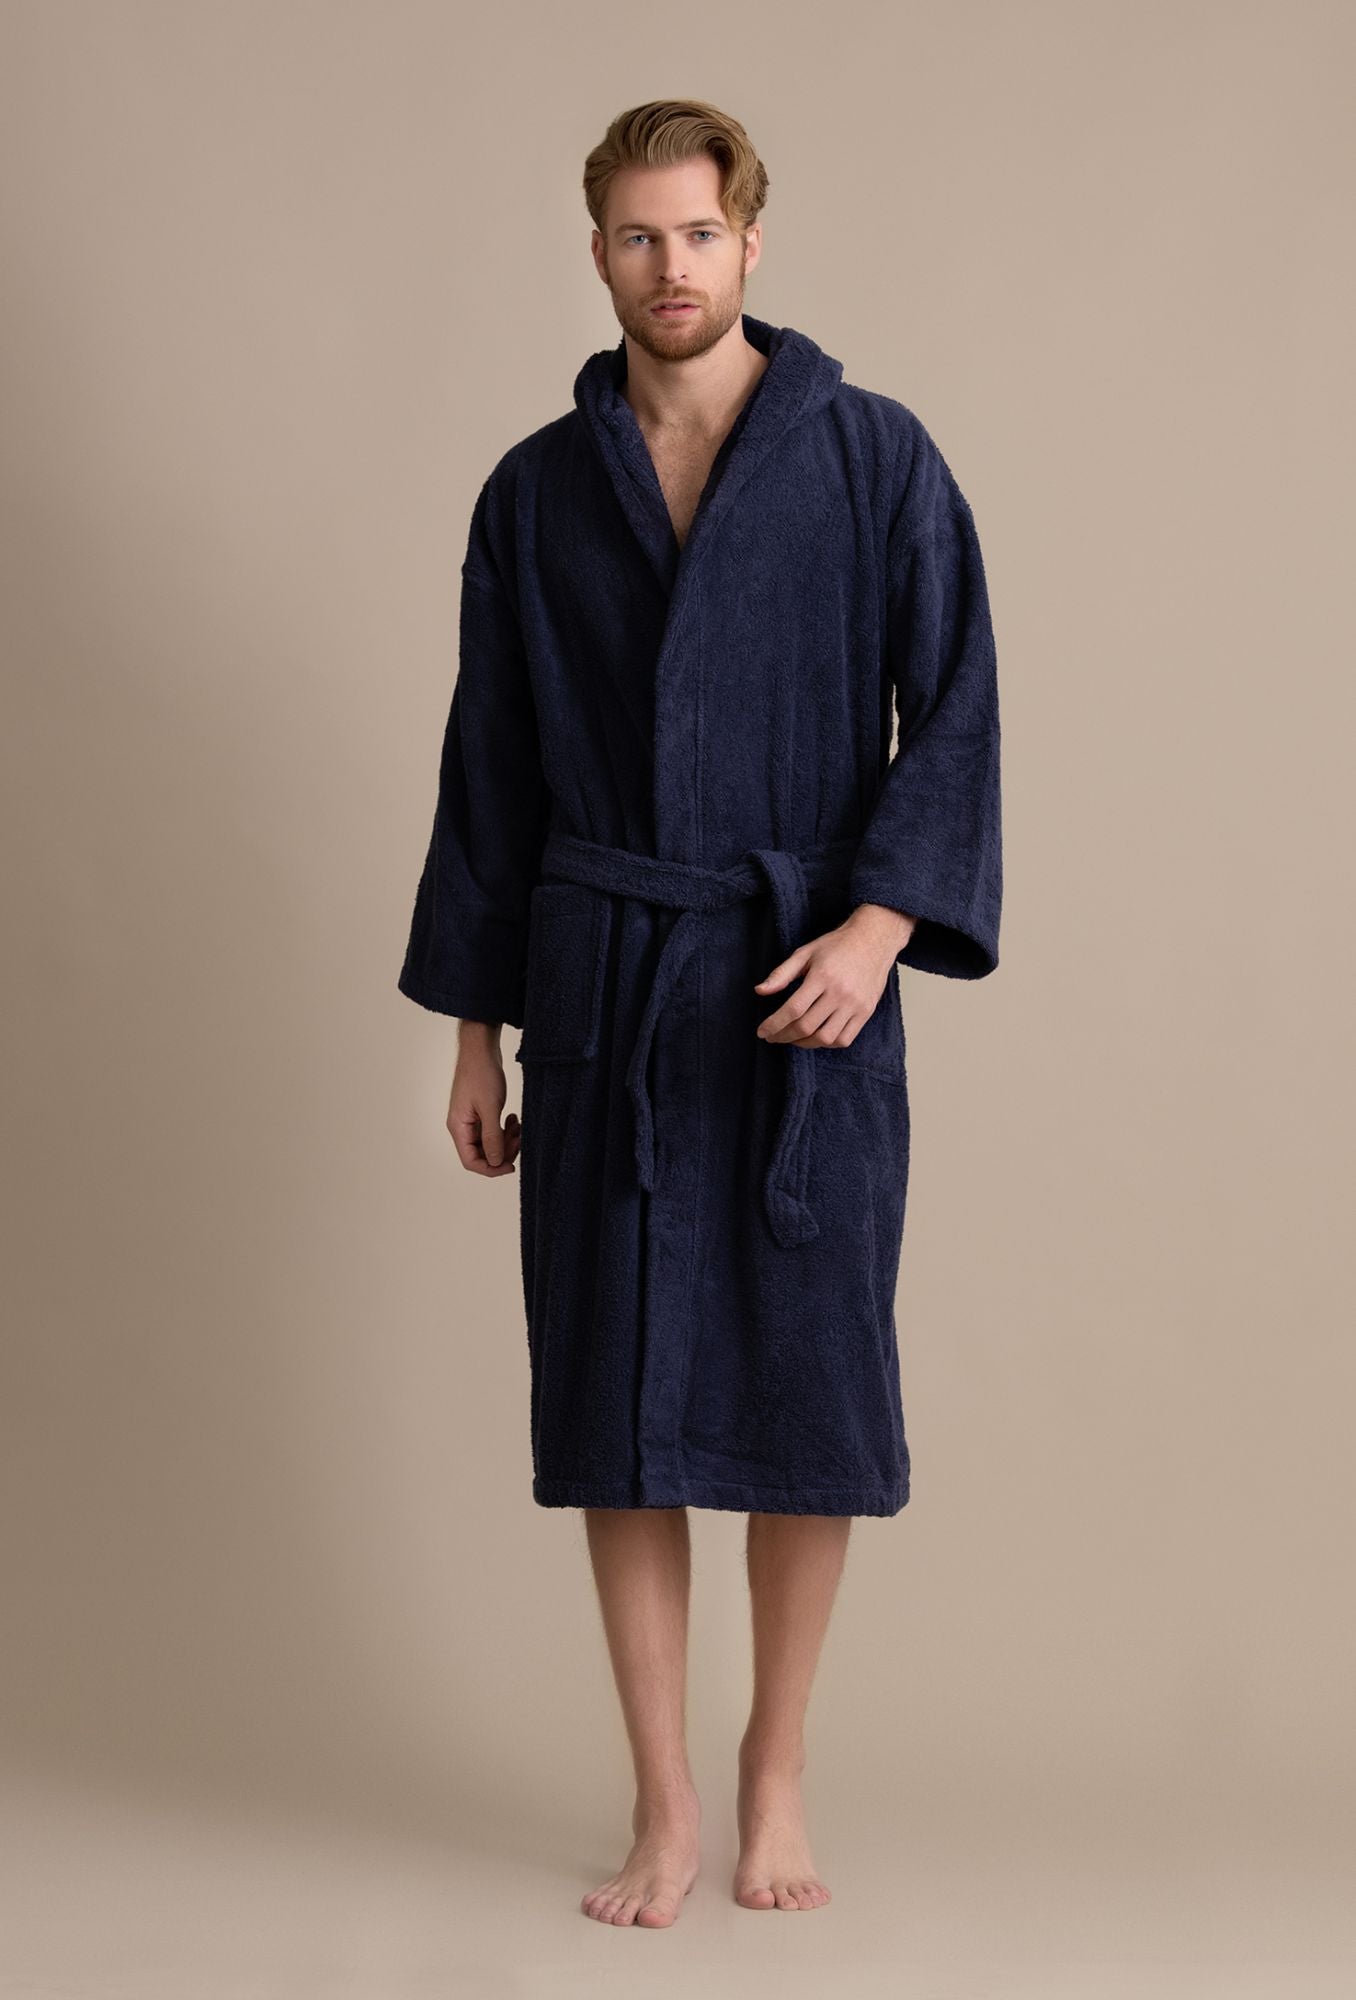 Buy Rangoli Cotton Bathrobe for Men with Matching Slippers, 400 GSM bath  robes with Pockets, Lightweight & Highly Absorbent Luxurious Full Sleeves  Unisex Bath Gown/Bath Robe, Navy Blue Online at Low Prices